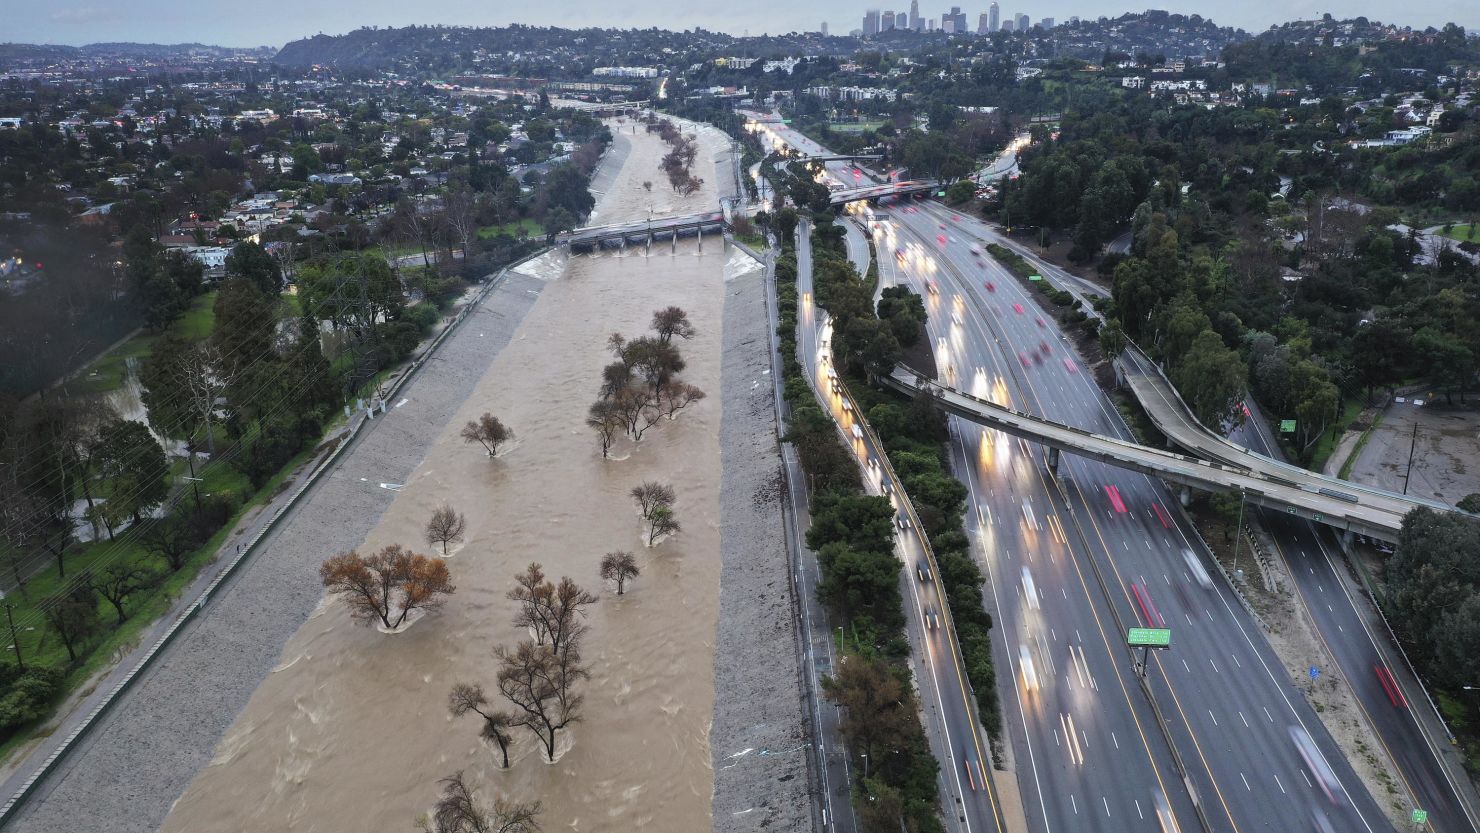 The Los Angeles River swollen by storm runoff on February 5 in Los Angeles.